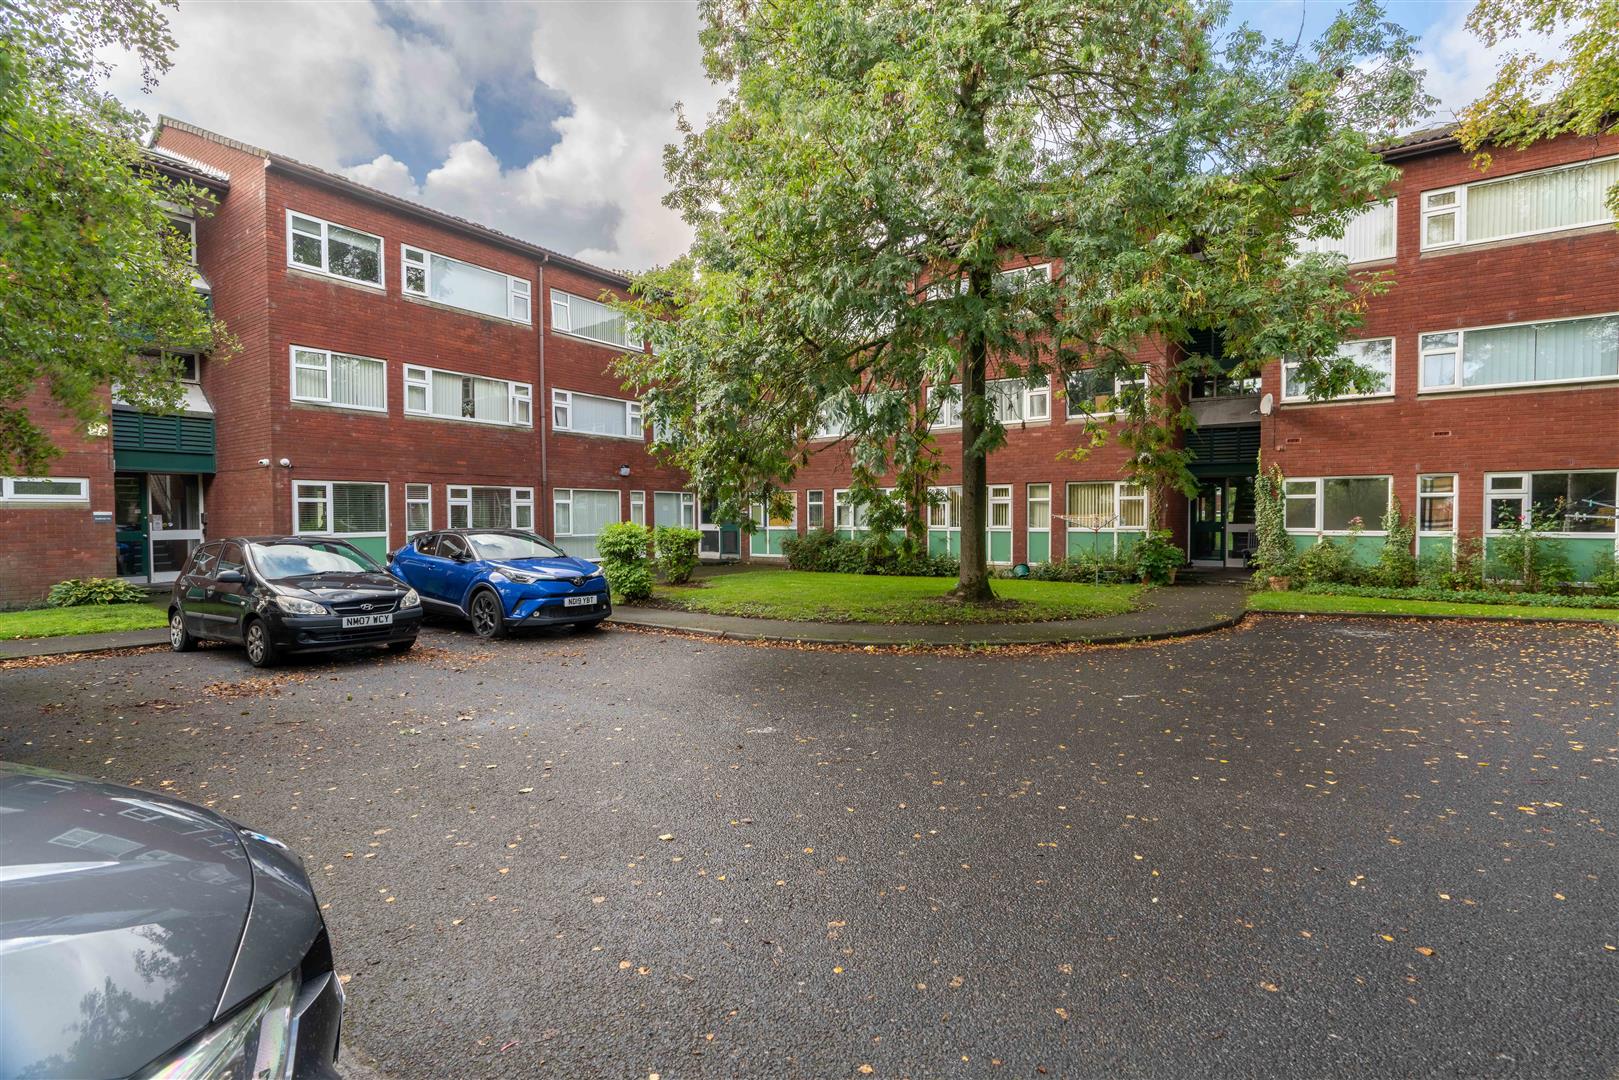 1 bed flat to rent in Whitbeck Court, Newcastle Upon Tyne, NE5 